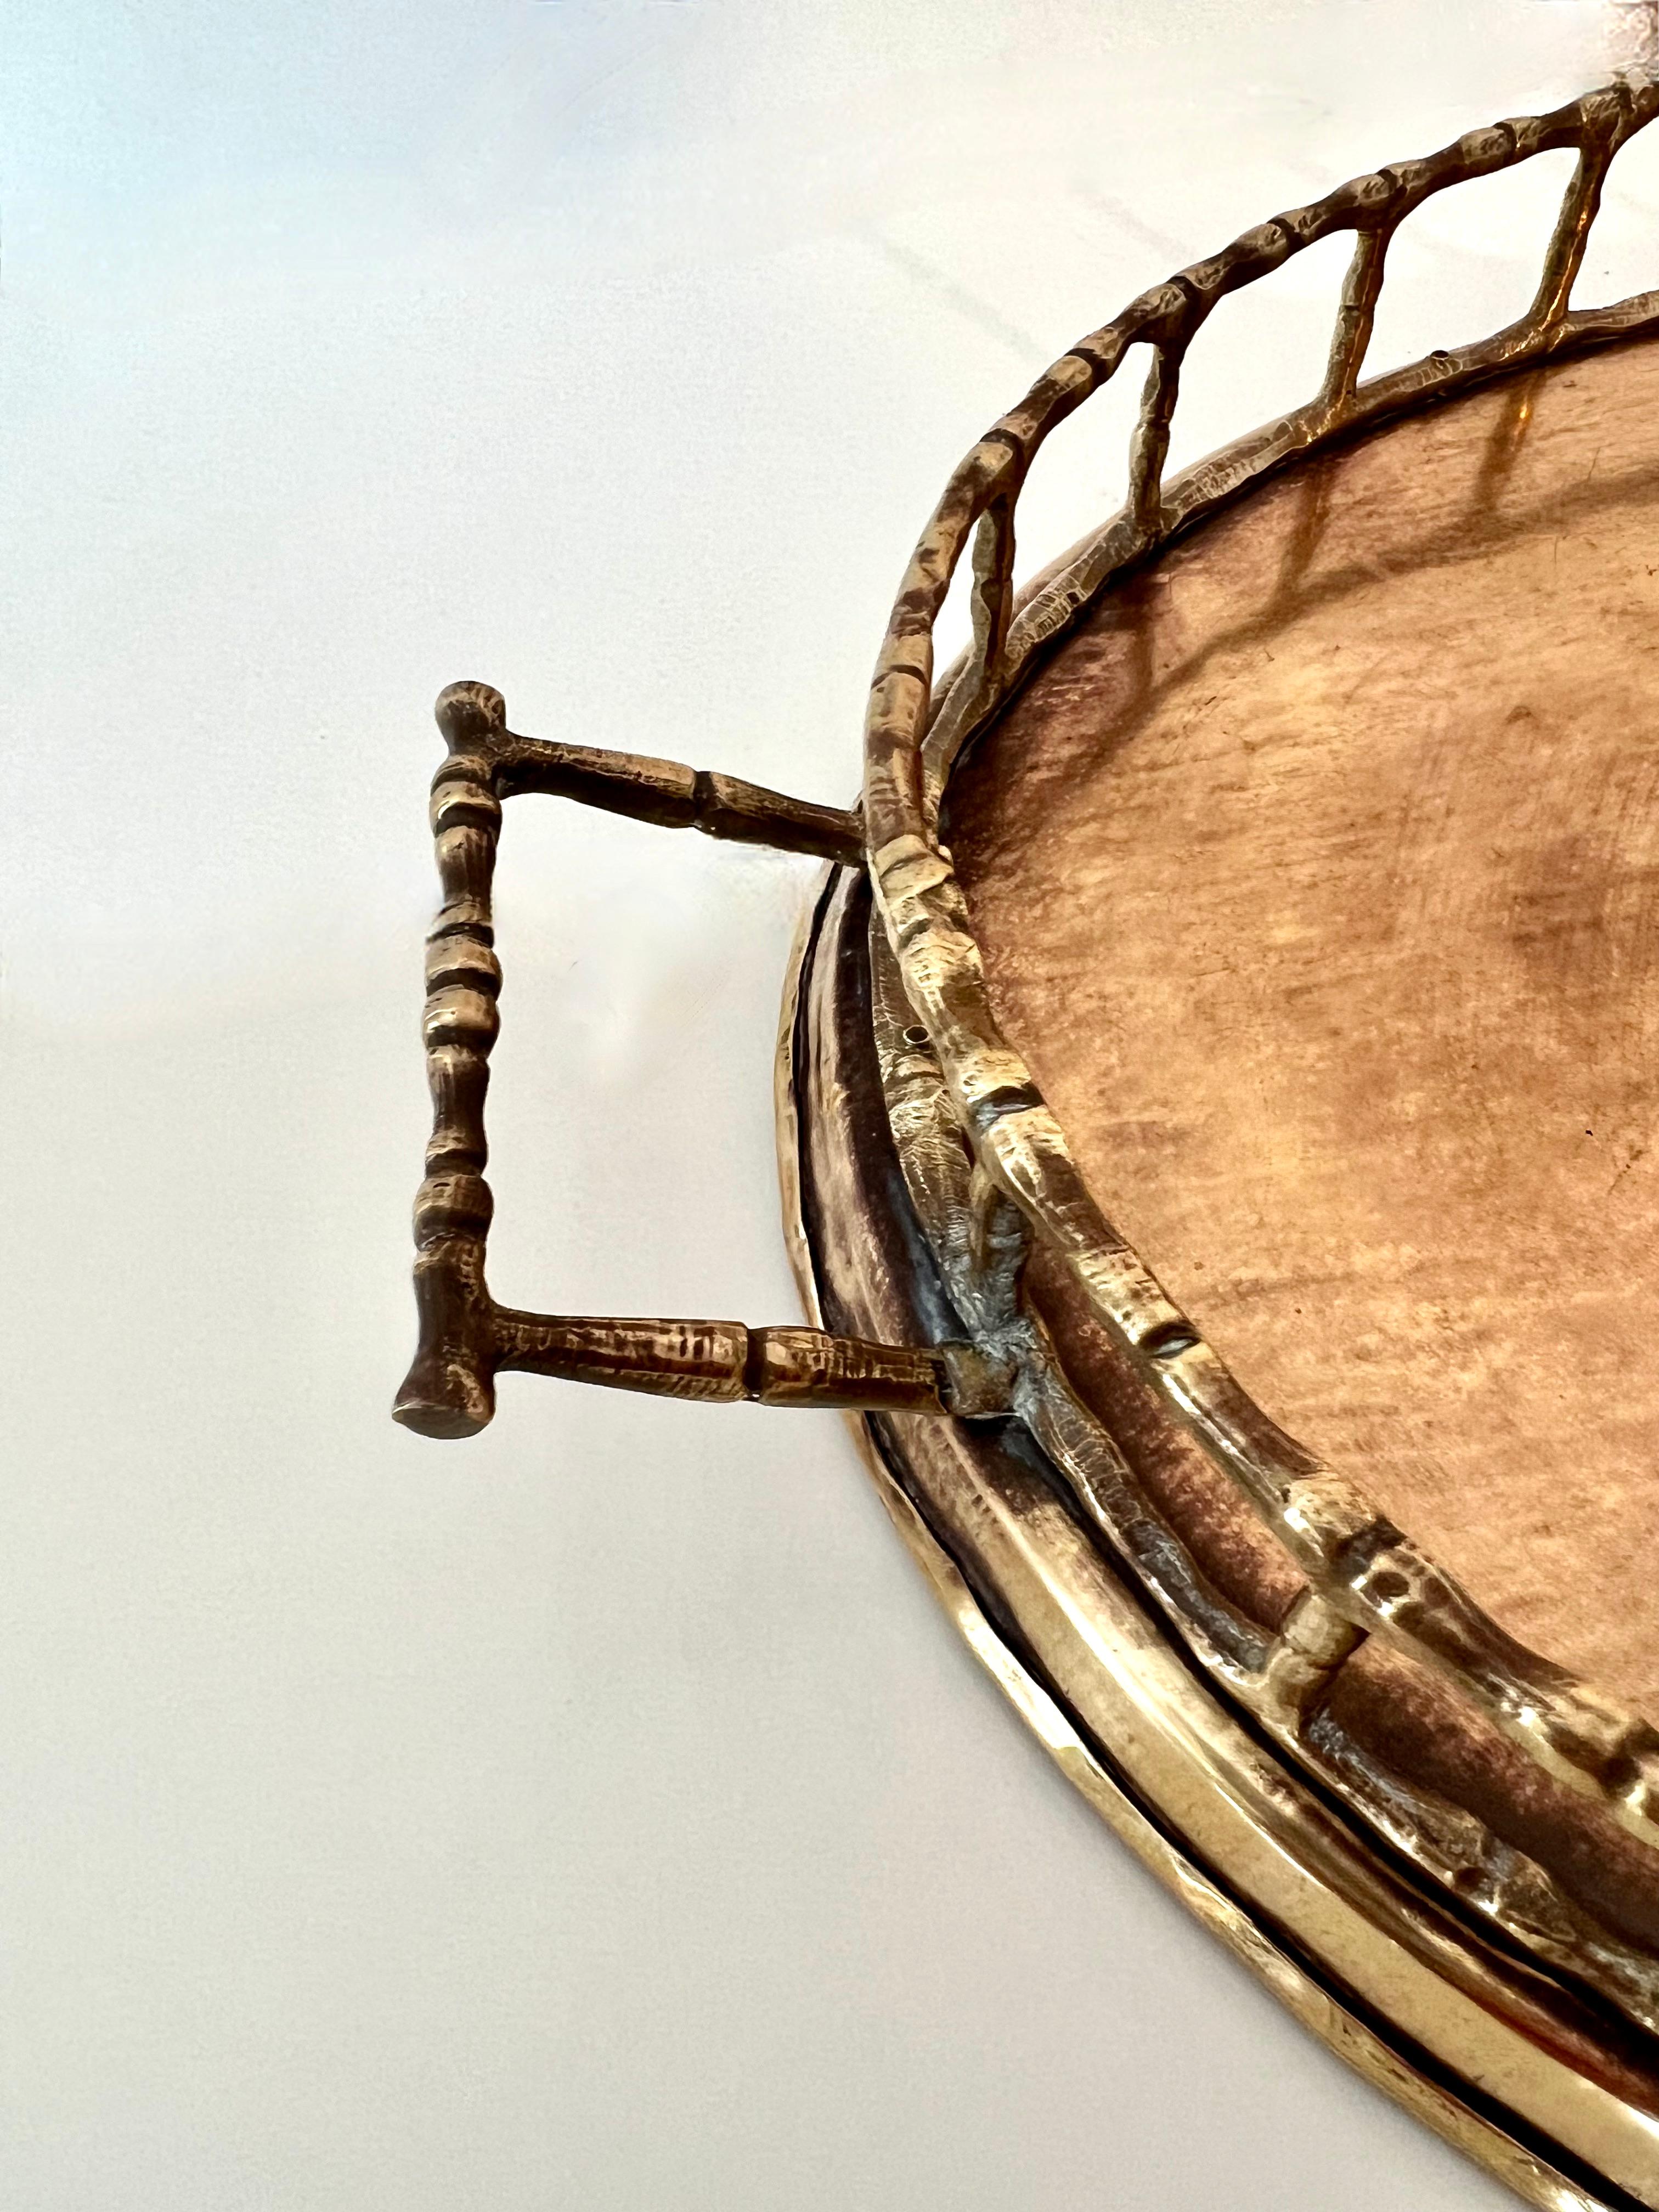 20th Century Brass Bamboo Tray in the Style of Ralph Lauren For Sale